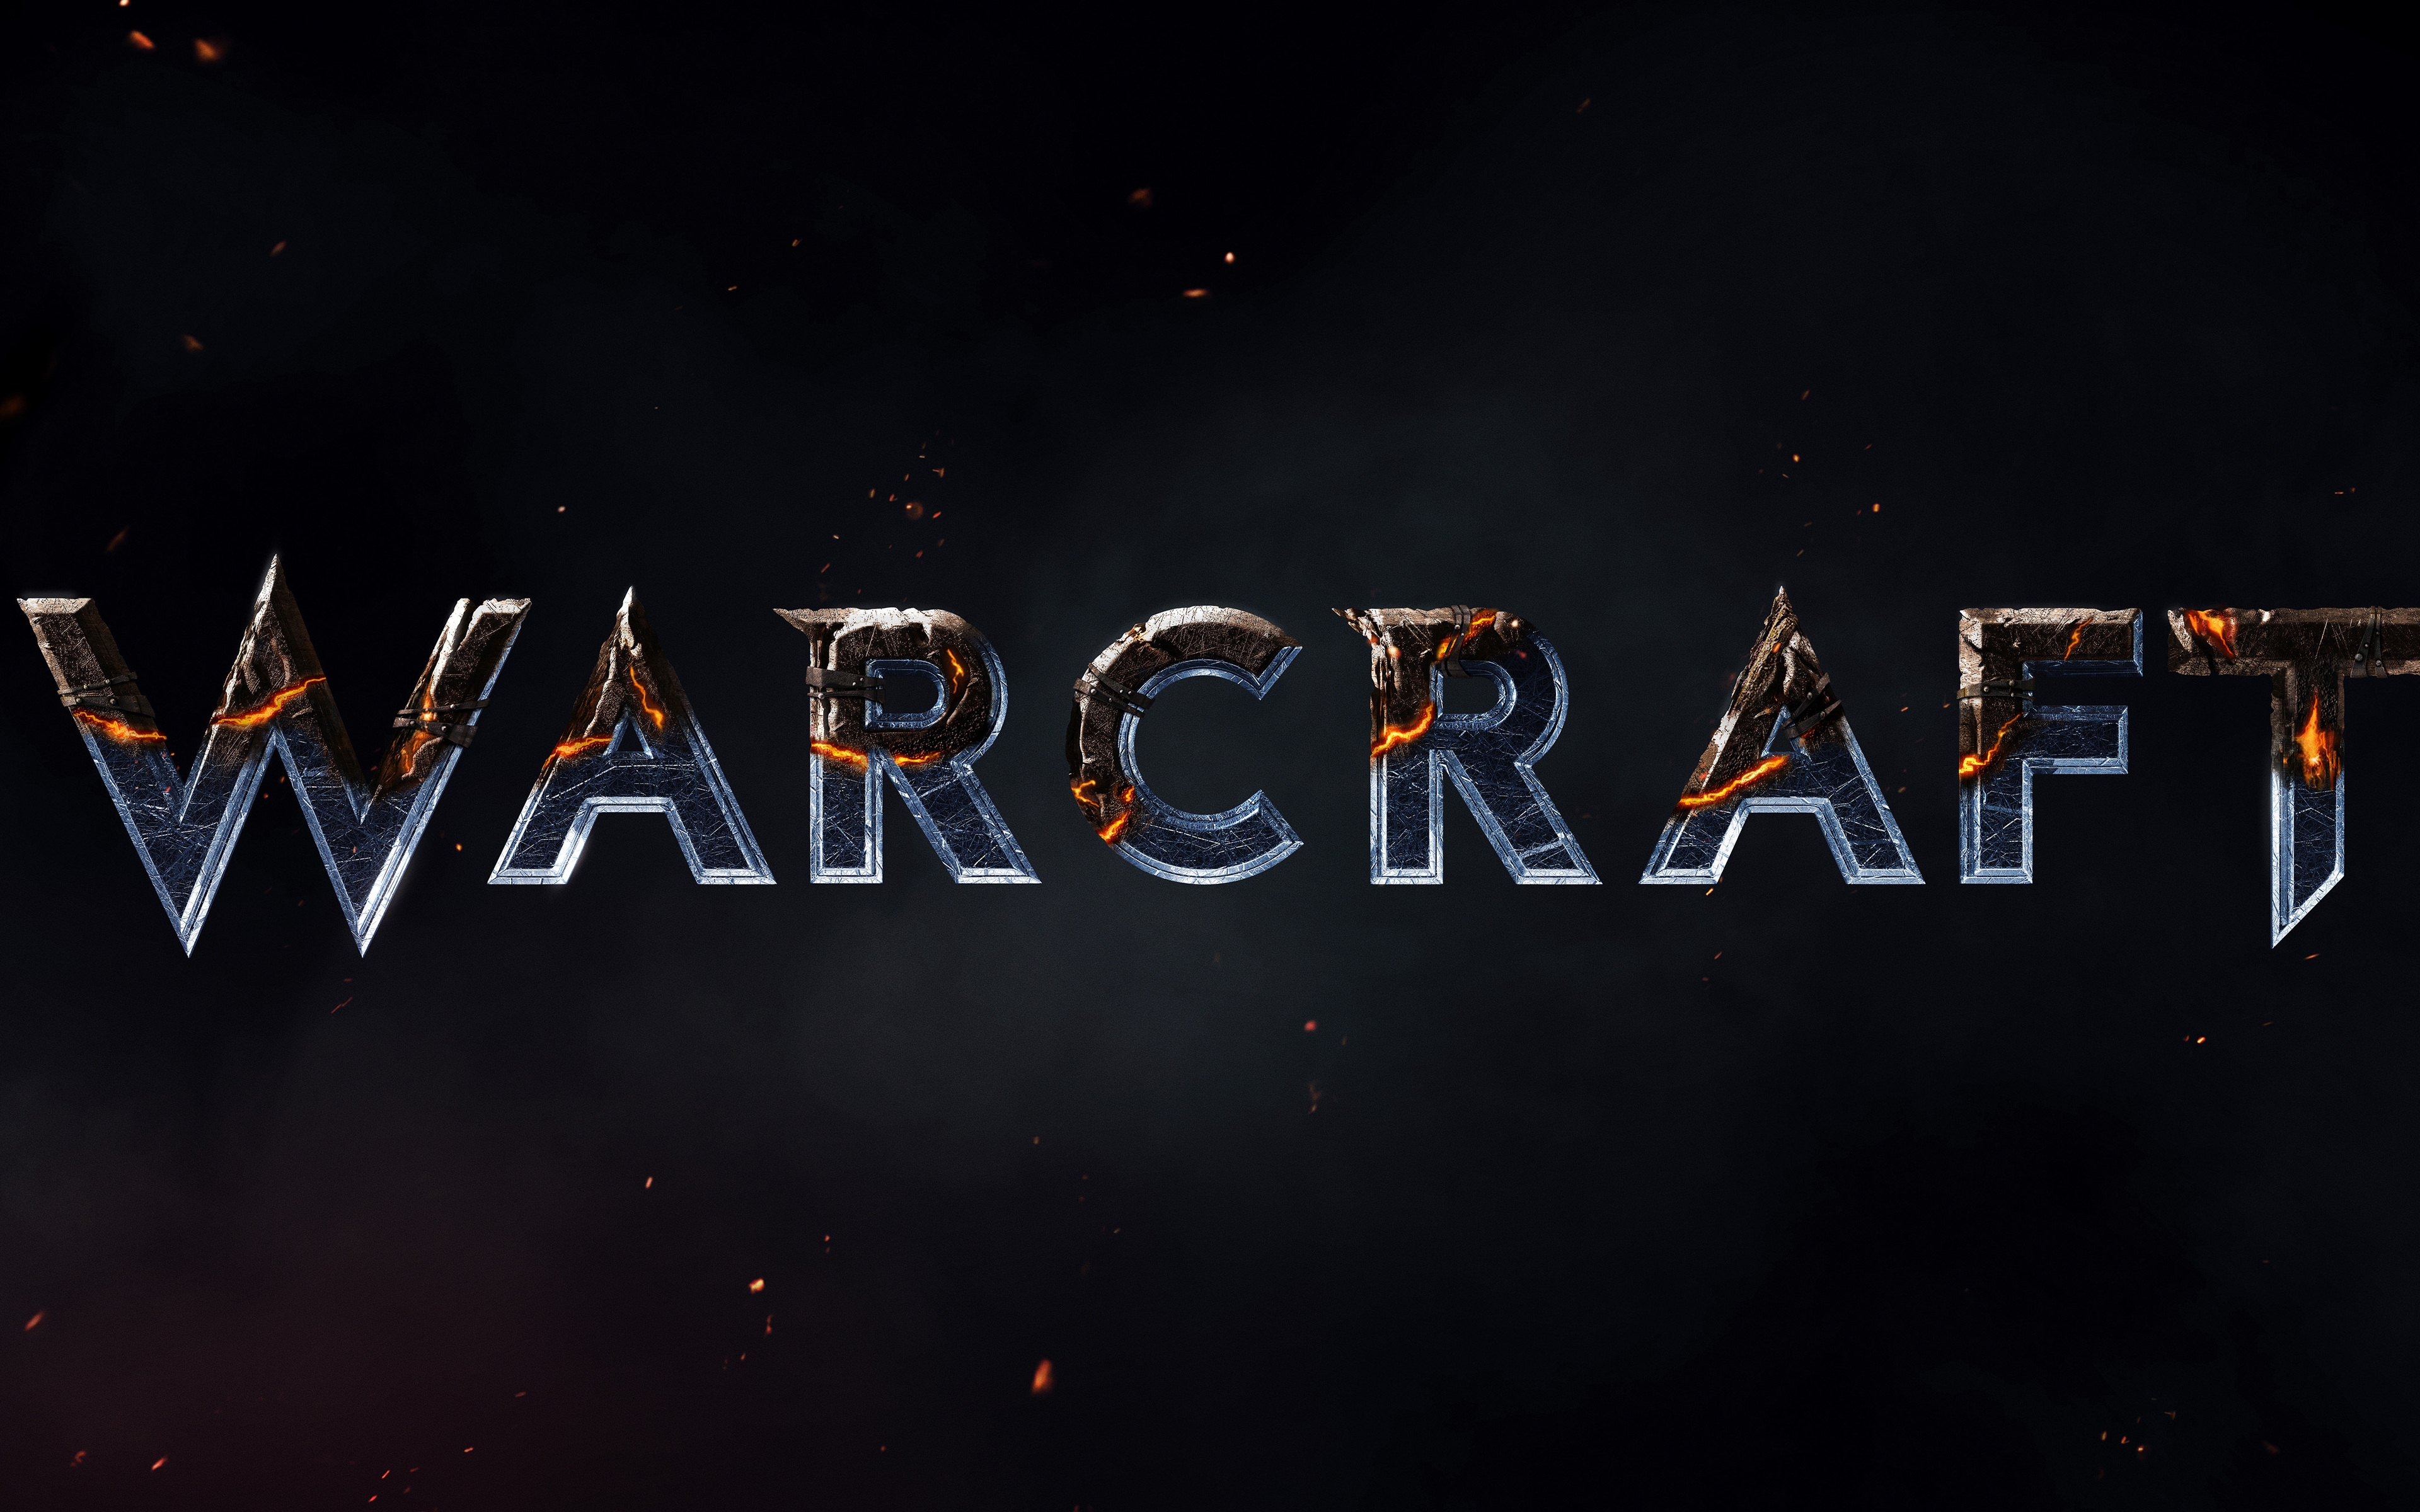 Warcraft Movie 2016 for 3840 x 2400 Widescreen resolution